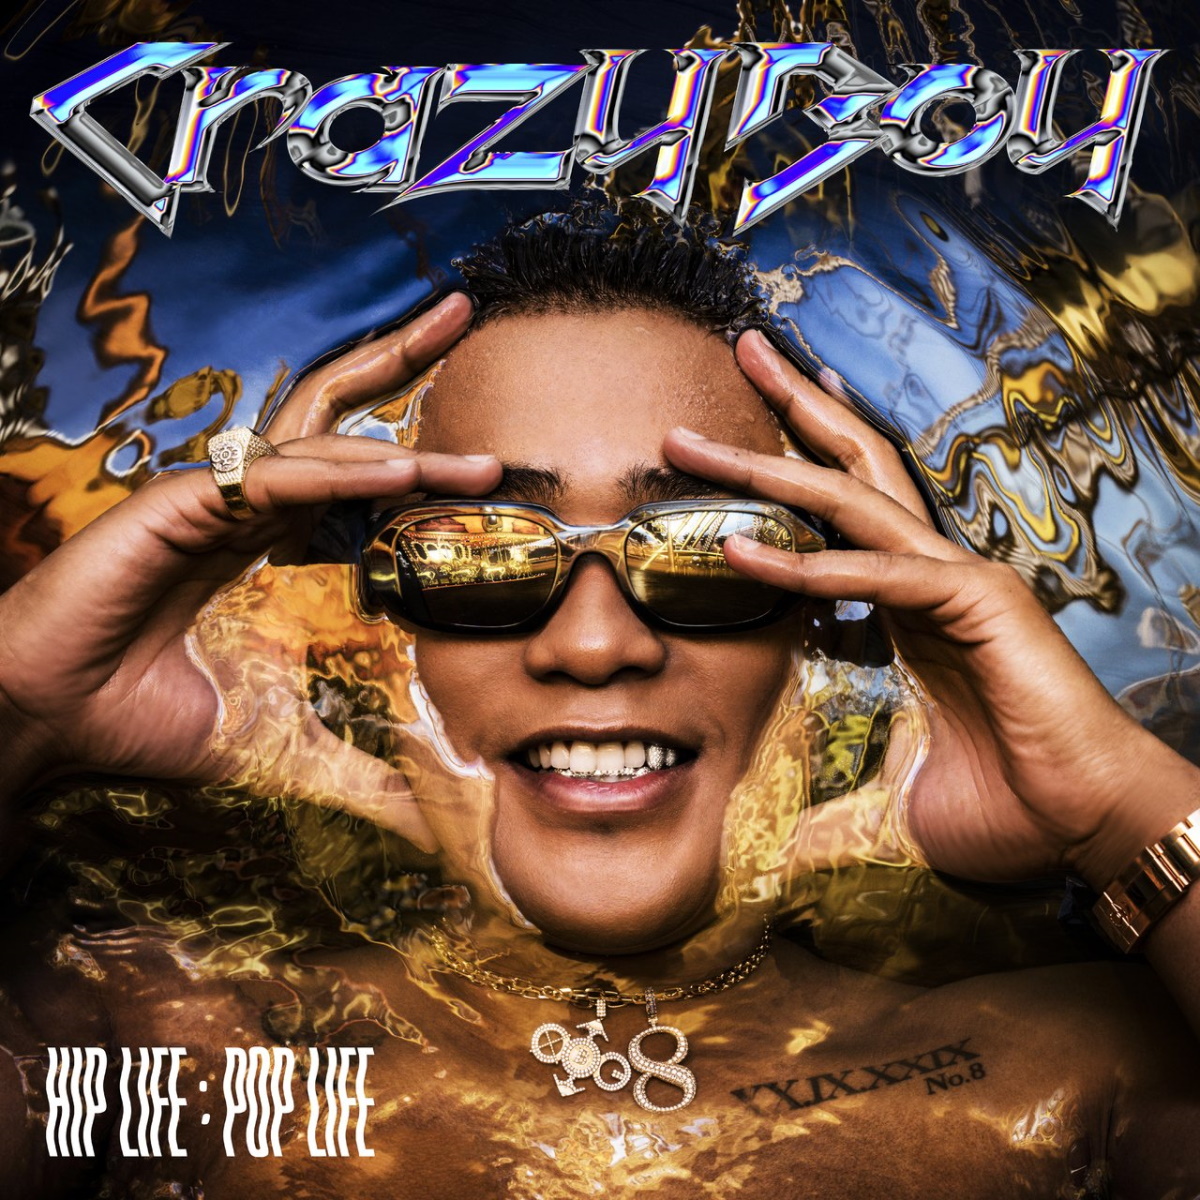 Cover for『CrazyBoy - it’s you』from the release『HIP LIFE：POP LIFE』